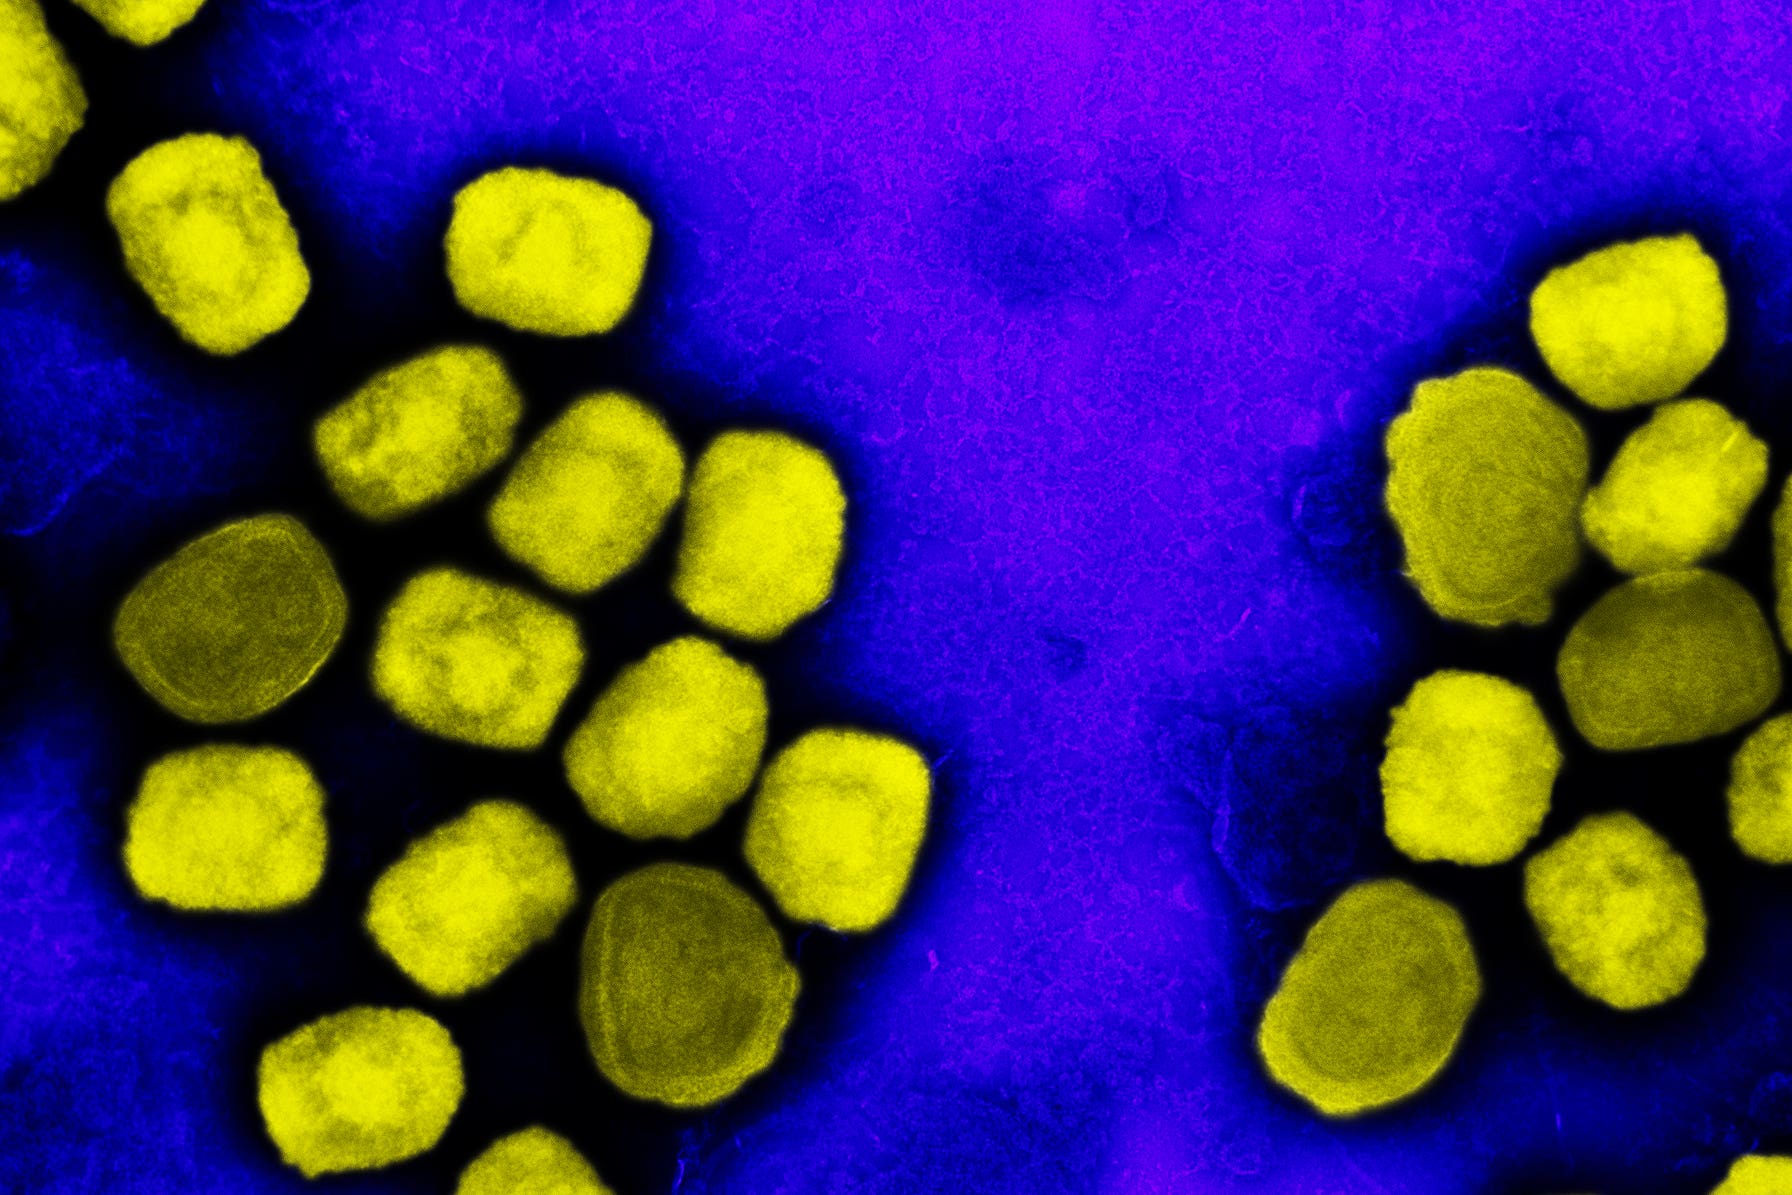 A colorized transmission electron micrograph of monkeypox virus particles (yellow)